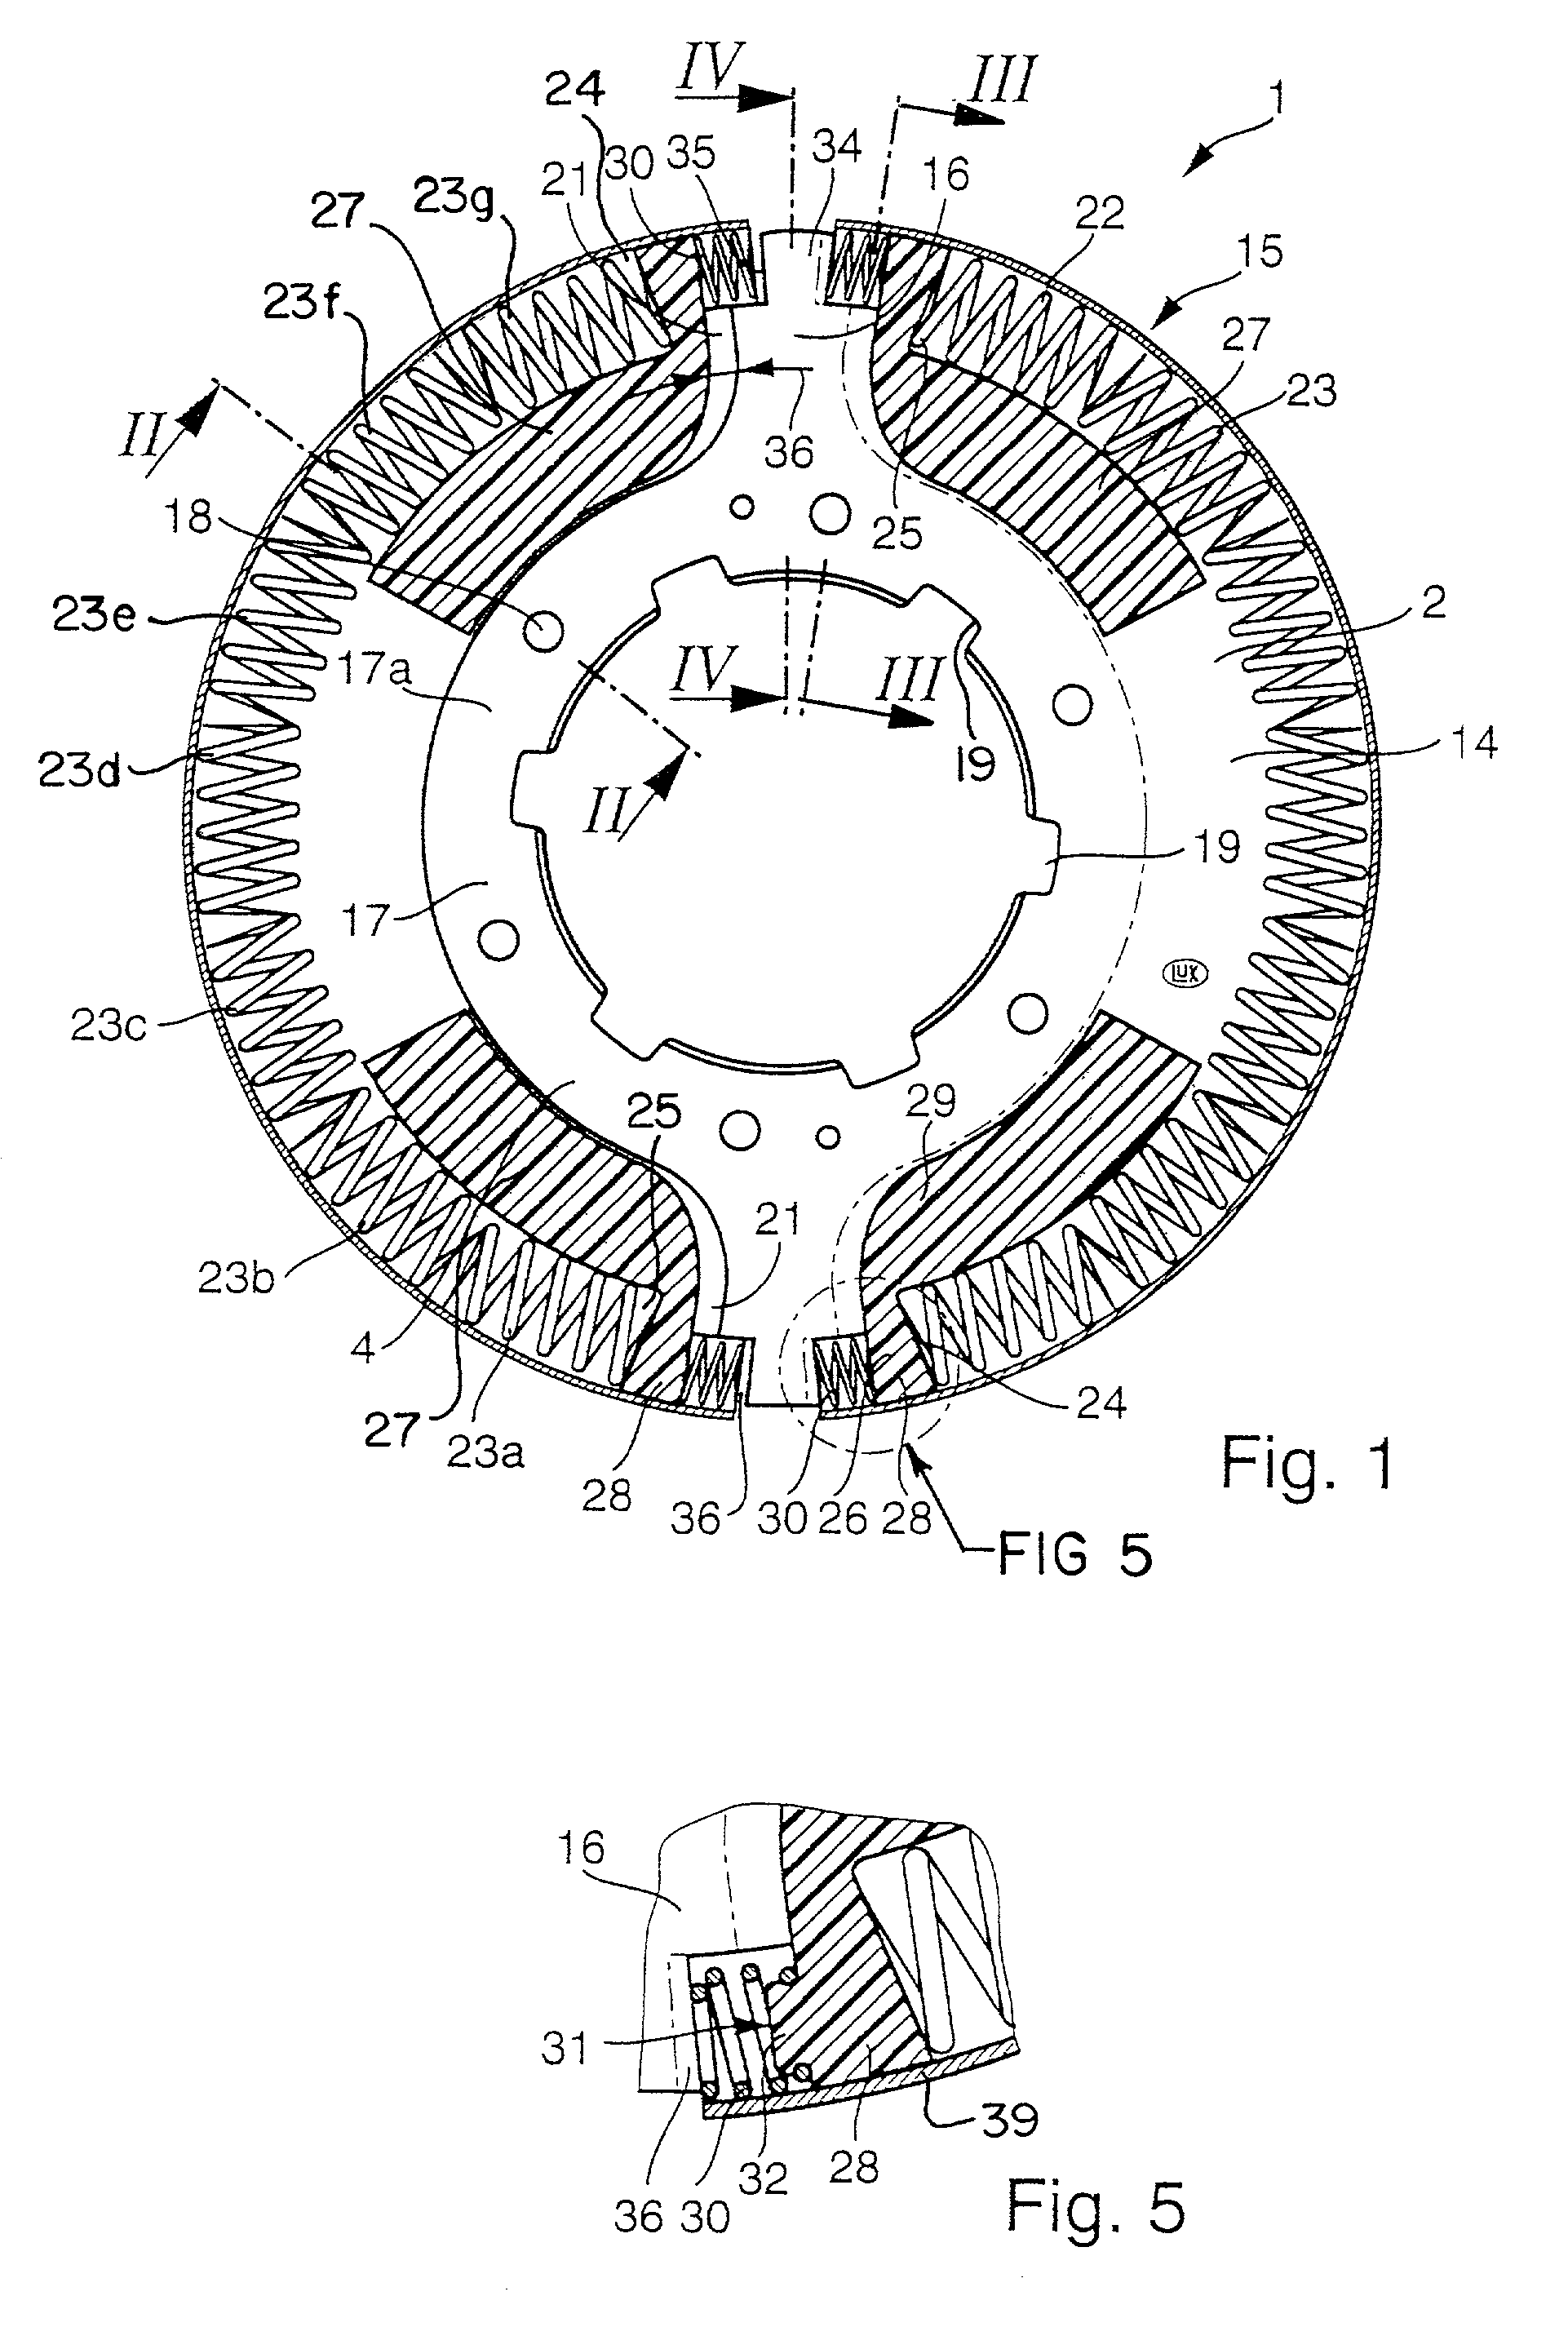 Apparatus for damping torsional vibrations in the power trains of motor vehicles and the like